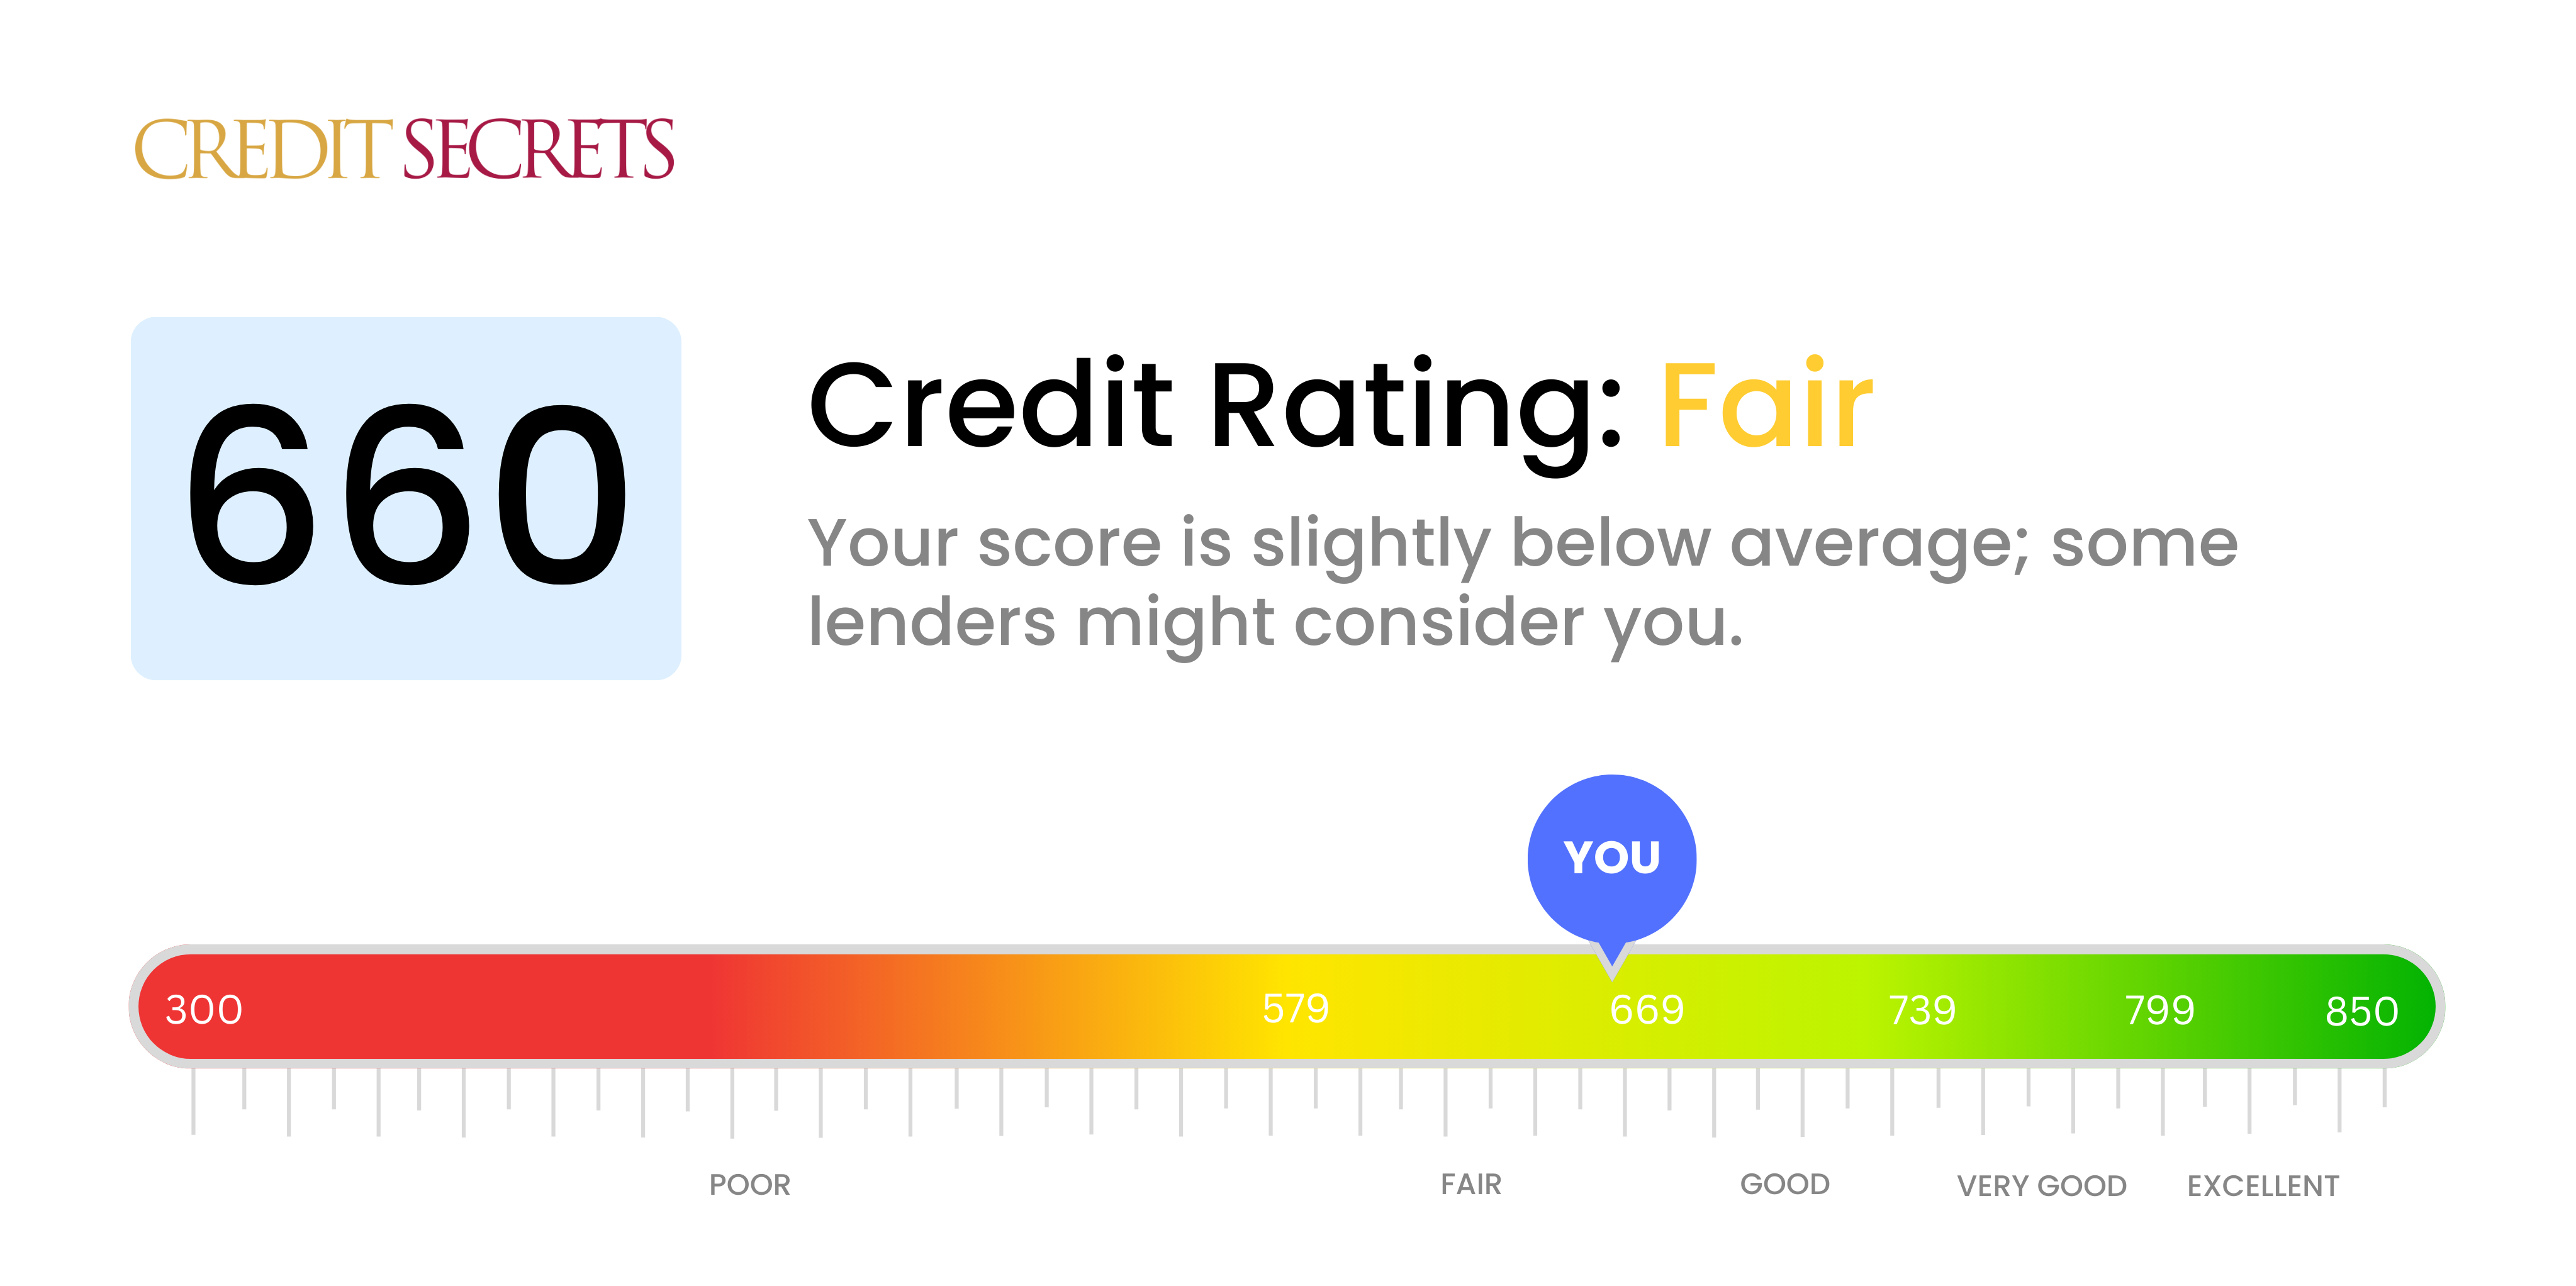 Is 660 a good credit score?